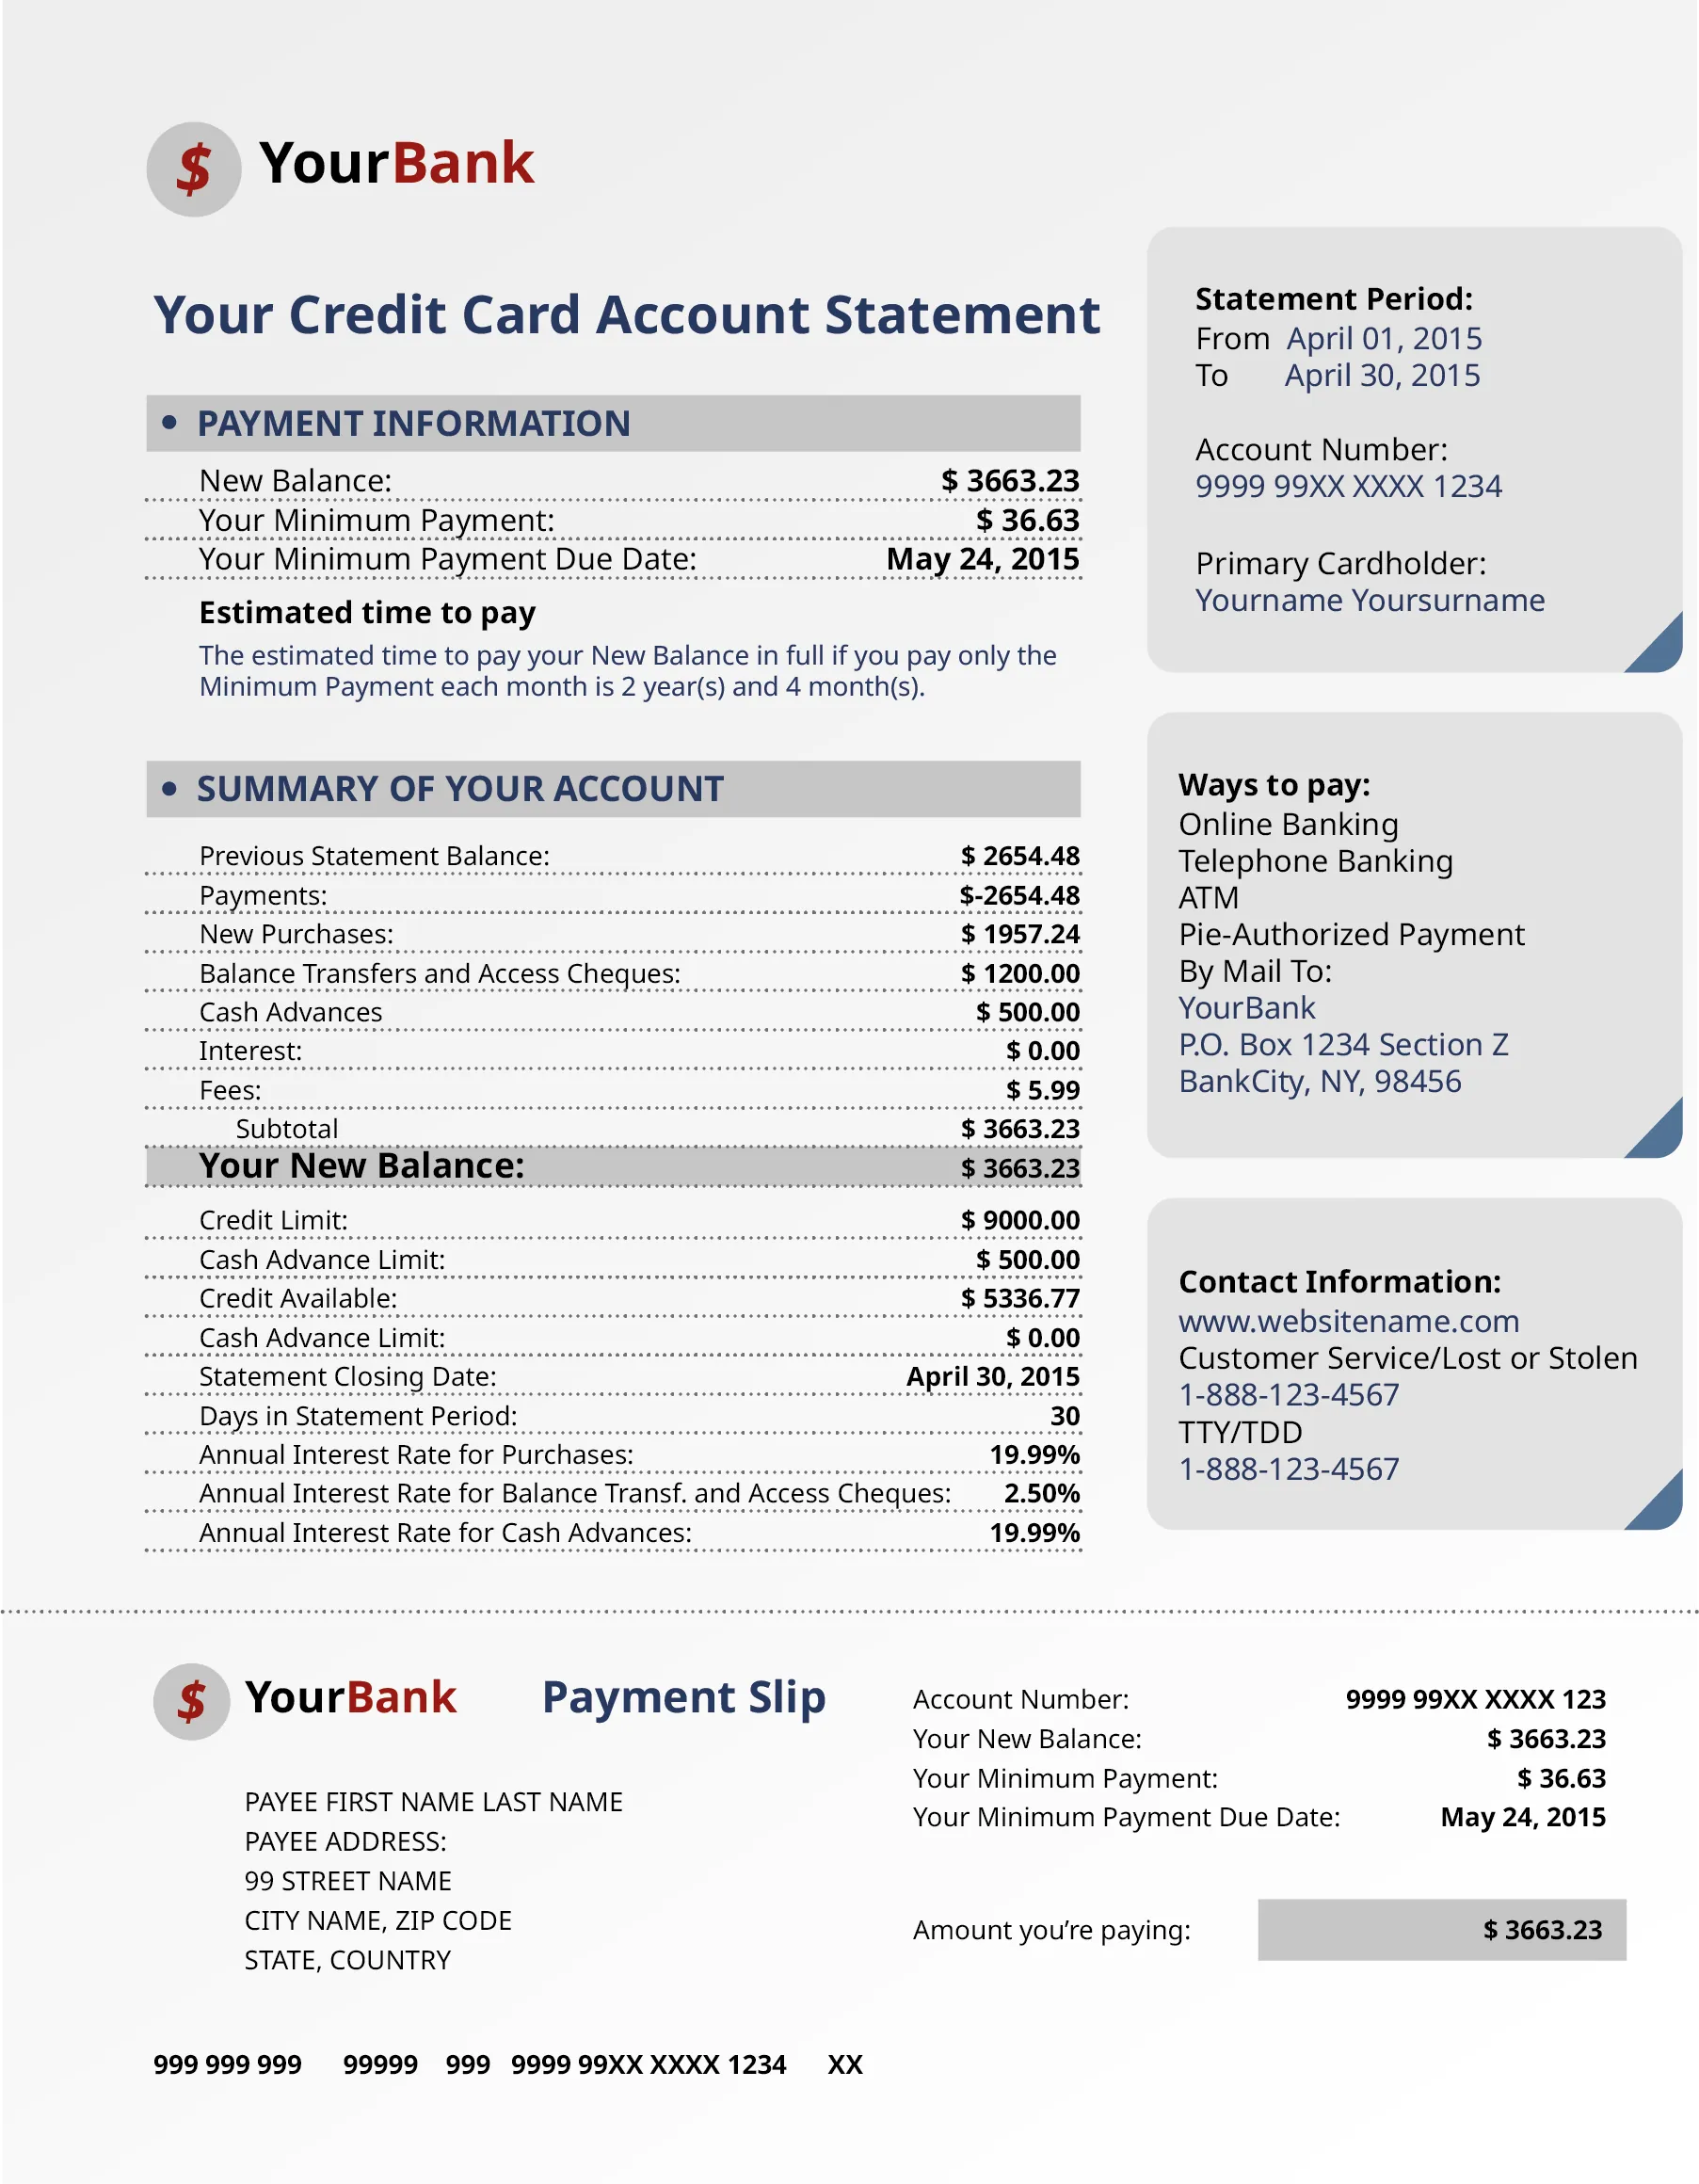 A snapshot of a bank statement of an account holder. The statement consists of payment information, a summary of the account, and new balance details. The statement period is from April 01, 2015, to April 30, 2015.